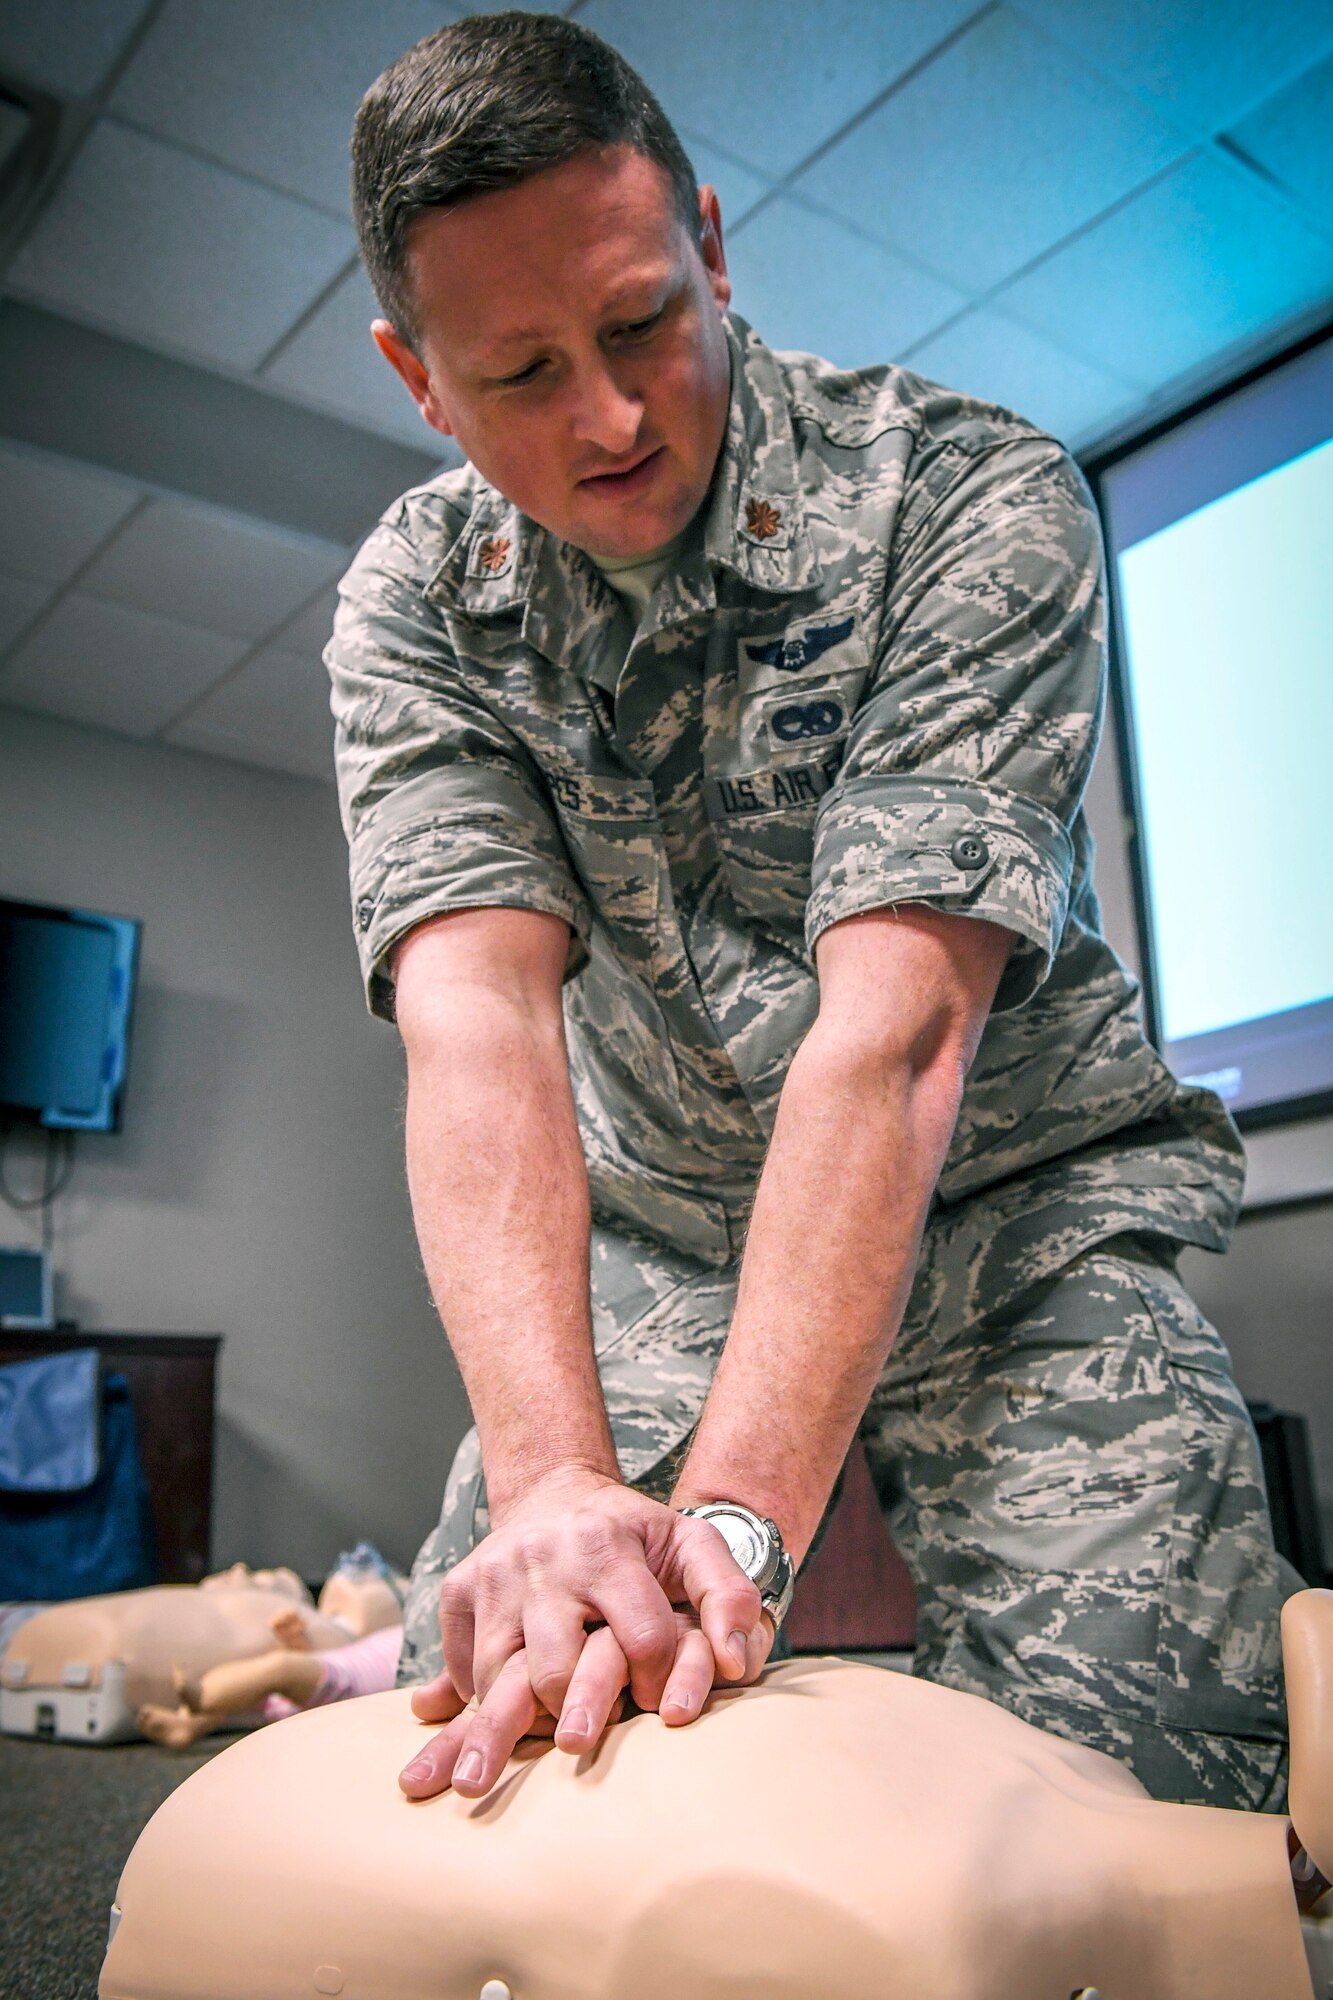 Maj. Eric Hoopes, commander of the 149th Fighter Wing’s Detachment 1, Texas Air National Guard, counts out compressions during a basic life support class at the 149th Medical Group, headquartered at Joint Base San Antonio, Texas, Nov. 30, 2016. Hoopes was instrumental in saving the life of a child who had nearly drowned to death at a local area pool. (U.S. Air National Guard photo by Tech. Sgt. Mindy Bloem)